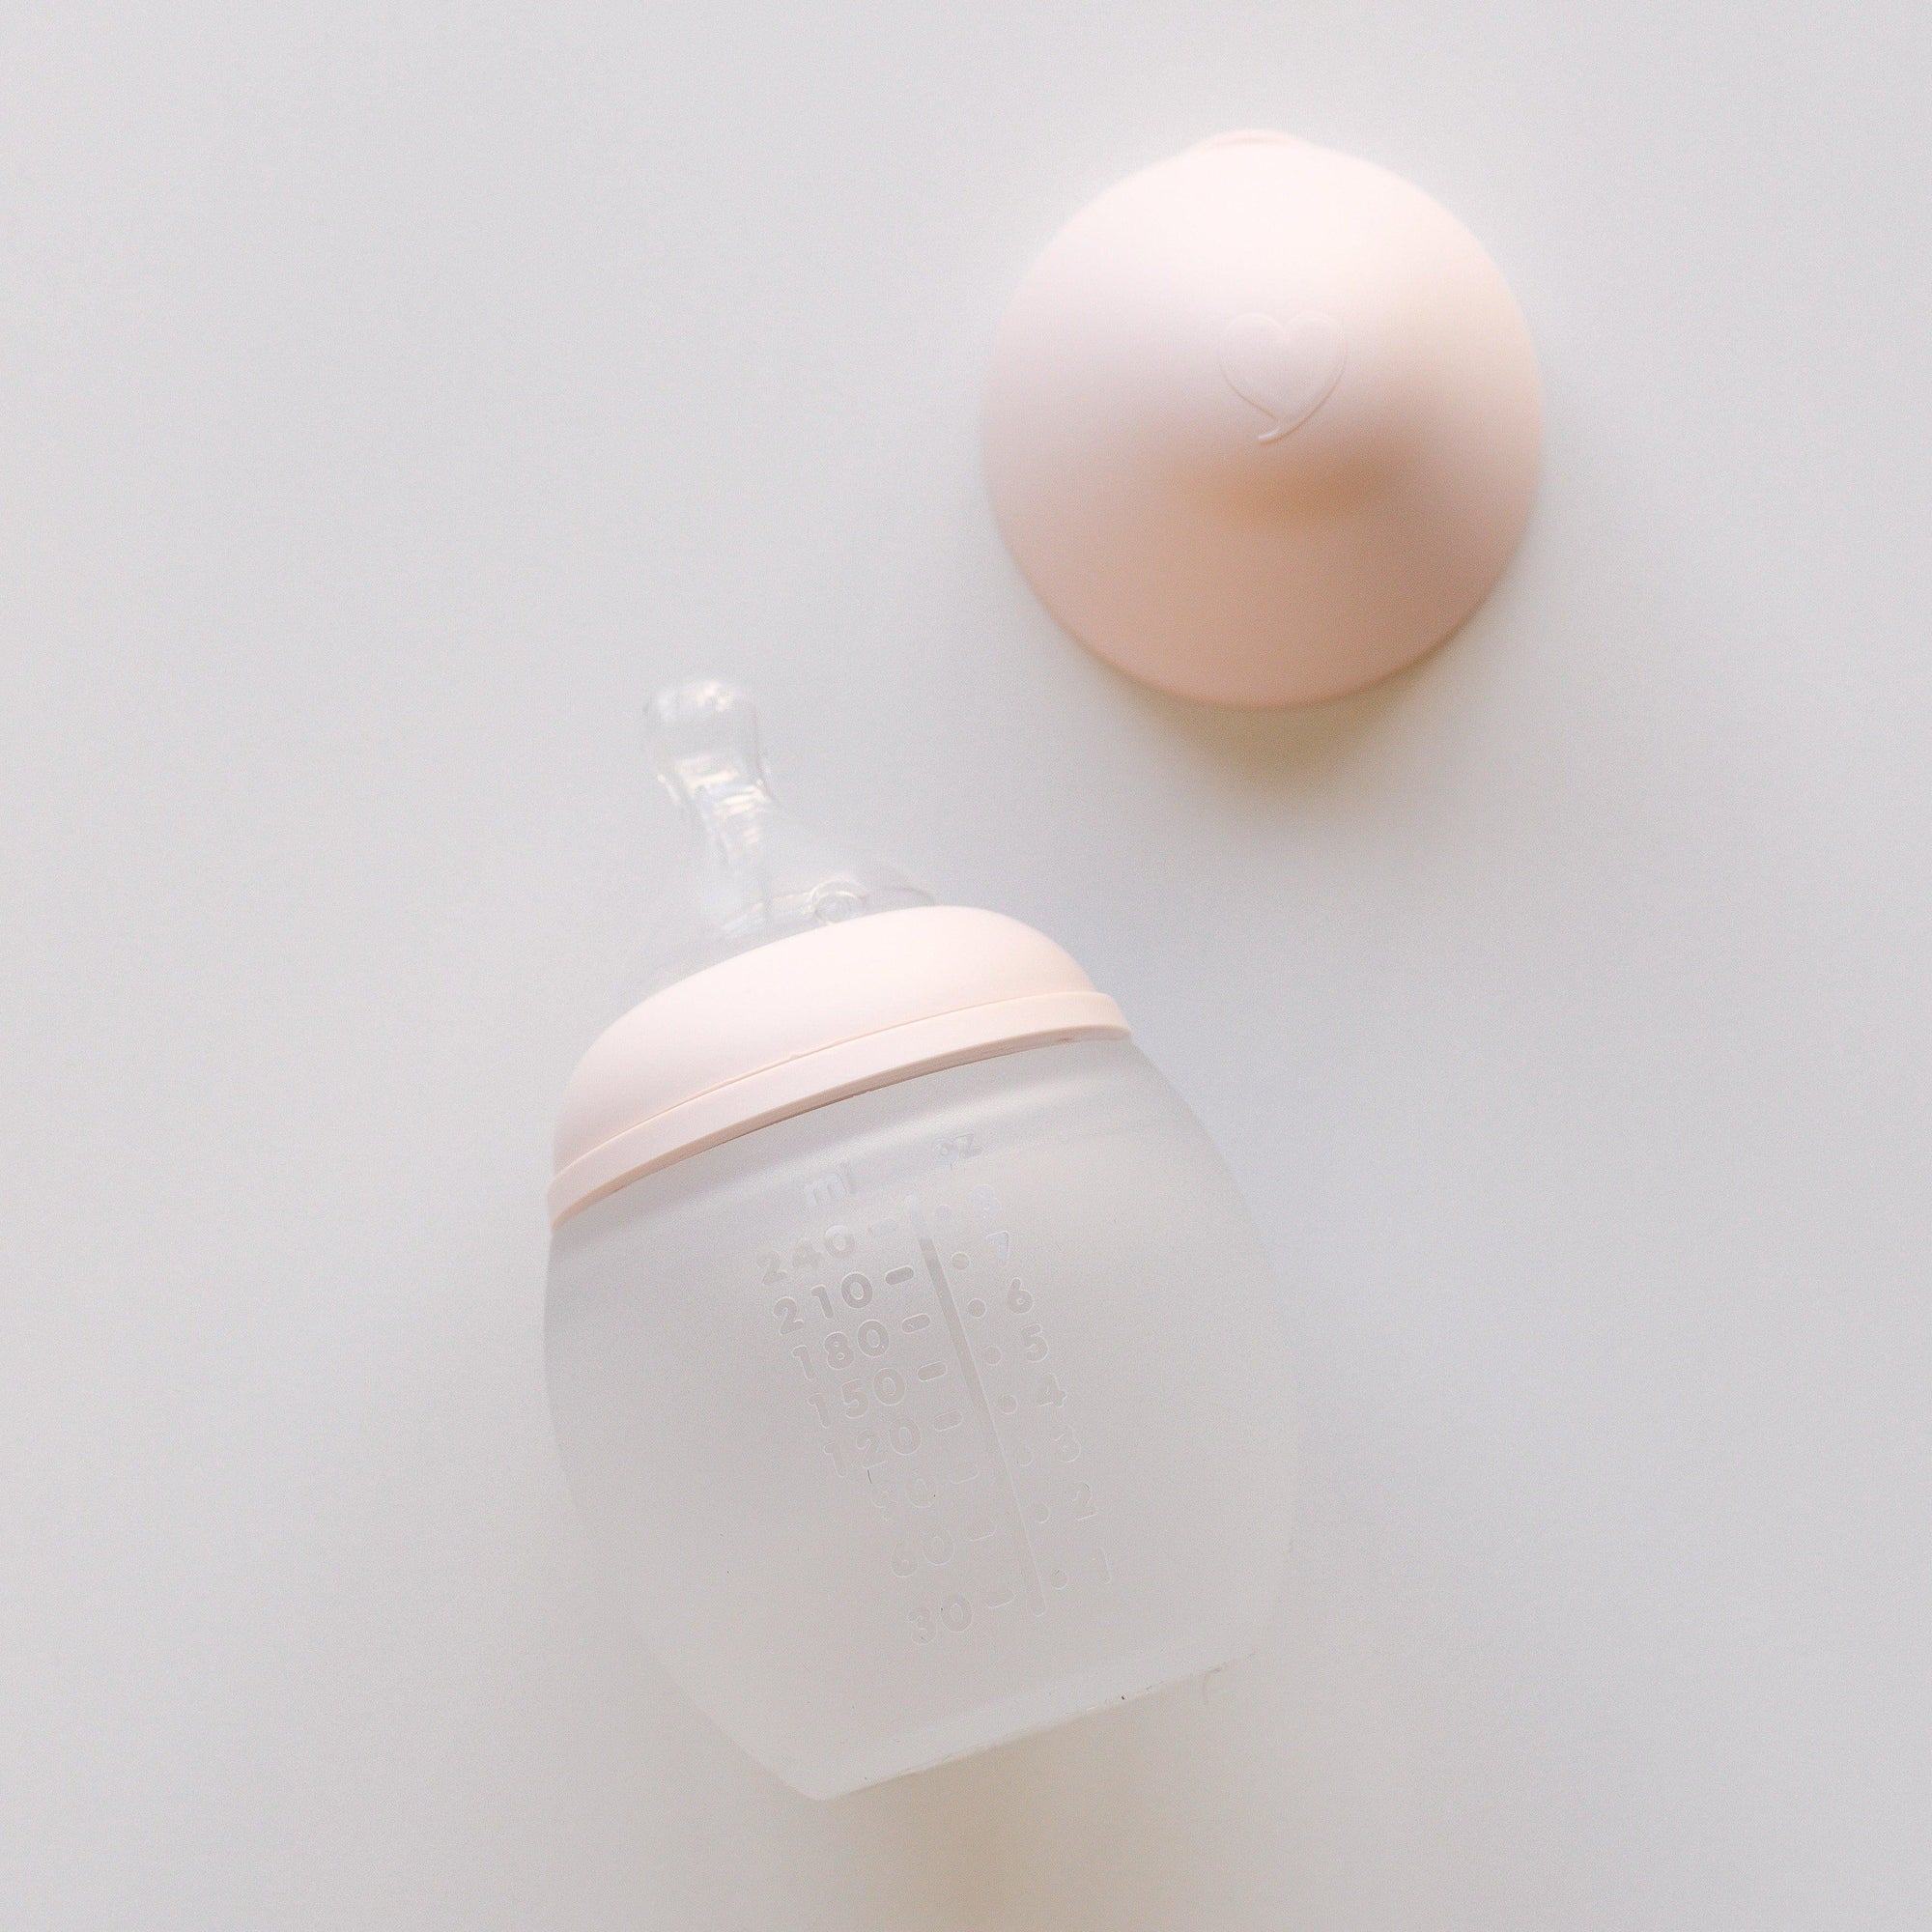 An Elhée France BibRond nude baby bottle laying on a white surface.